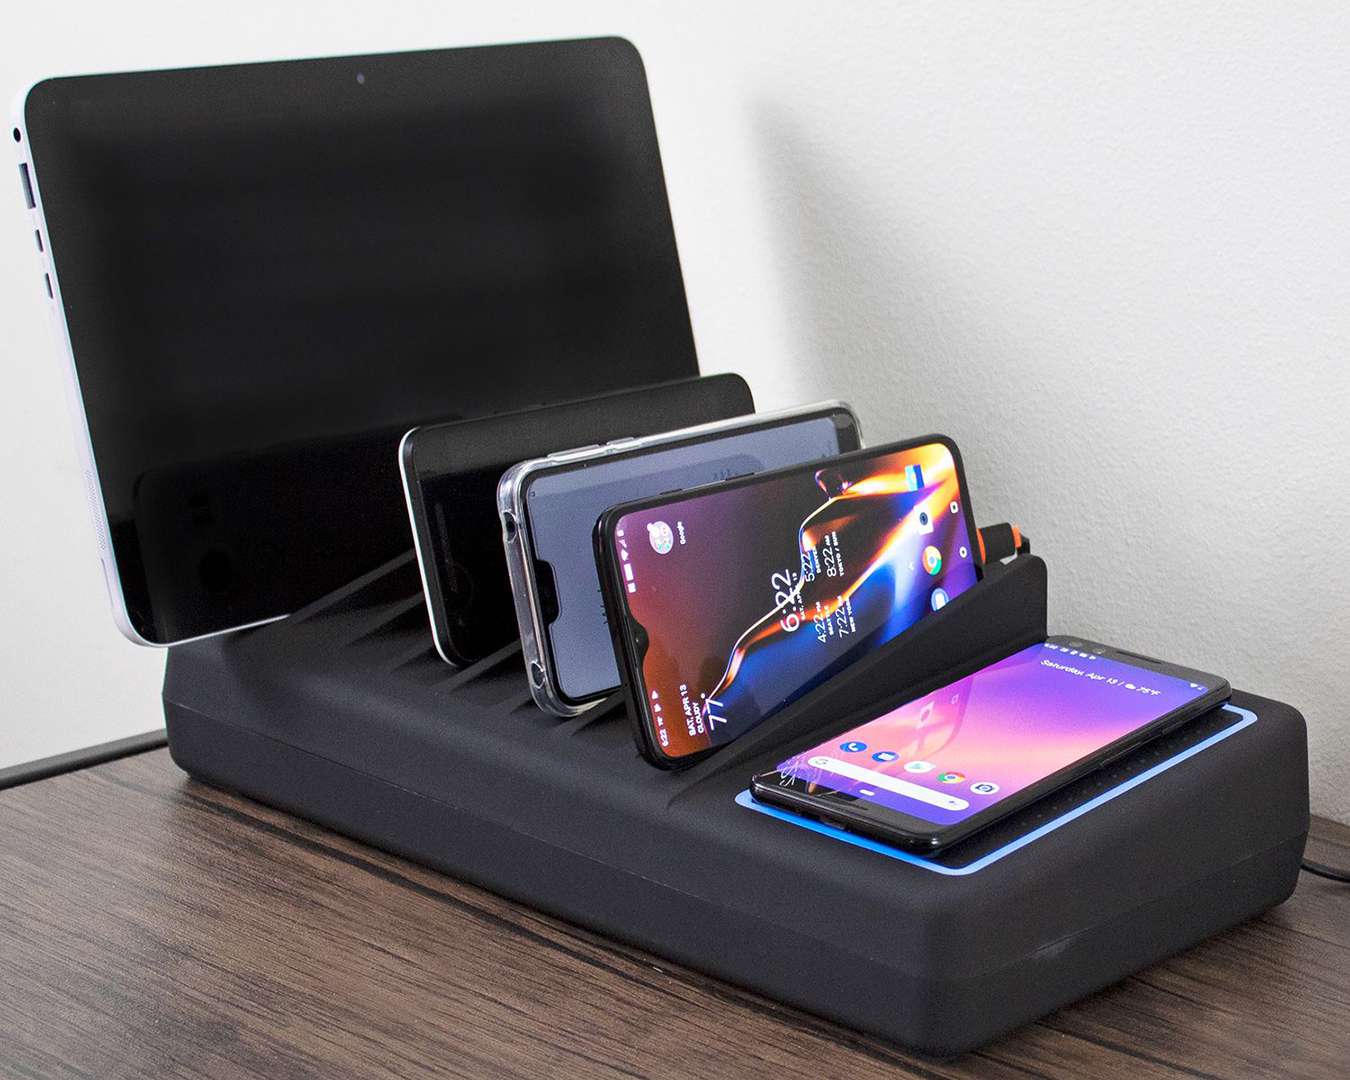 Non-Gaming Accessories - Charging Station